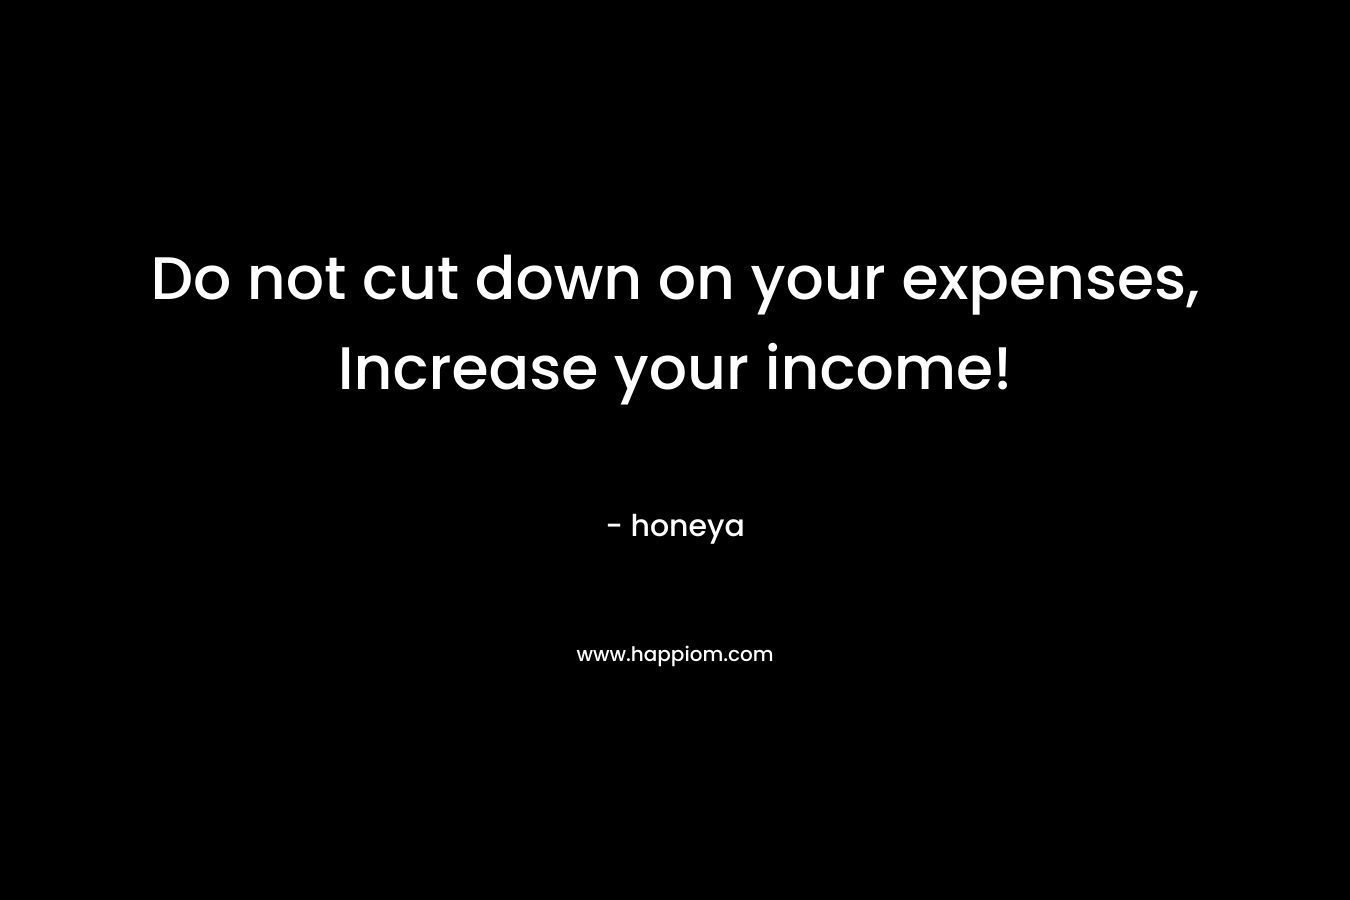 Do not cut down on your expenses, Increase your income!